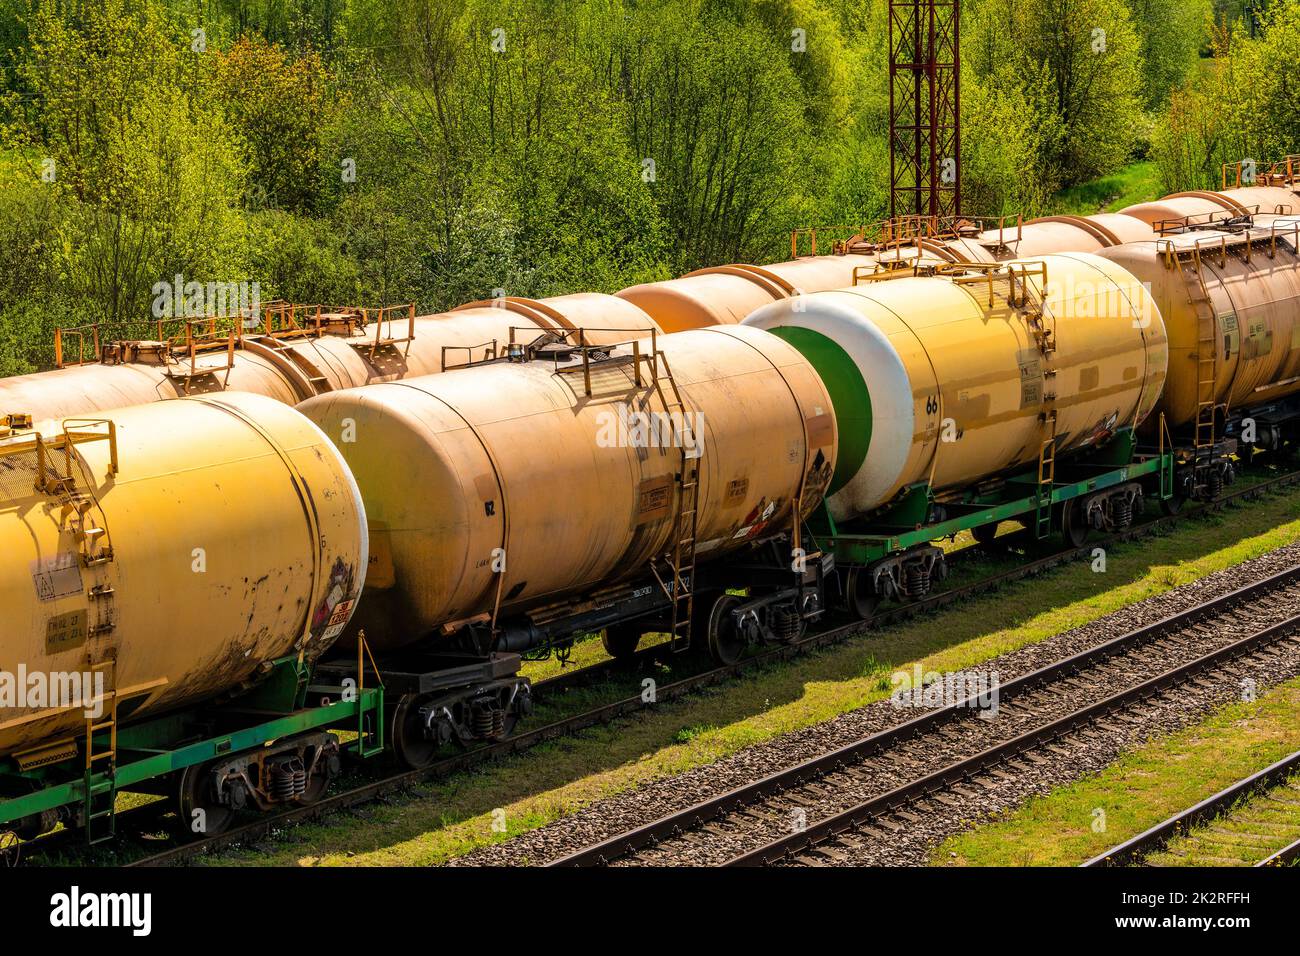 Freight trains transporting liquid fuel at depot Stock Photo